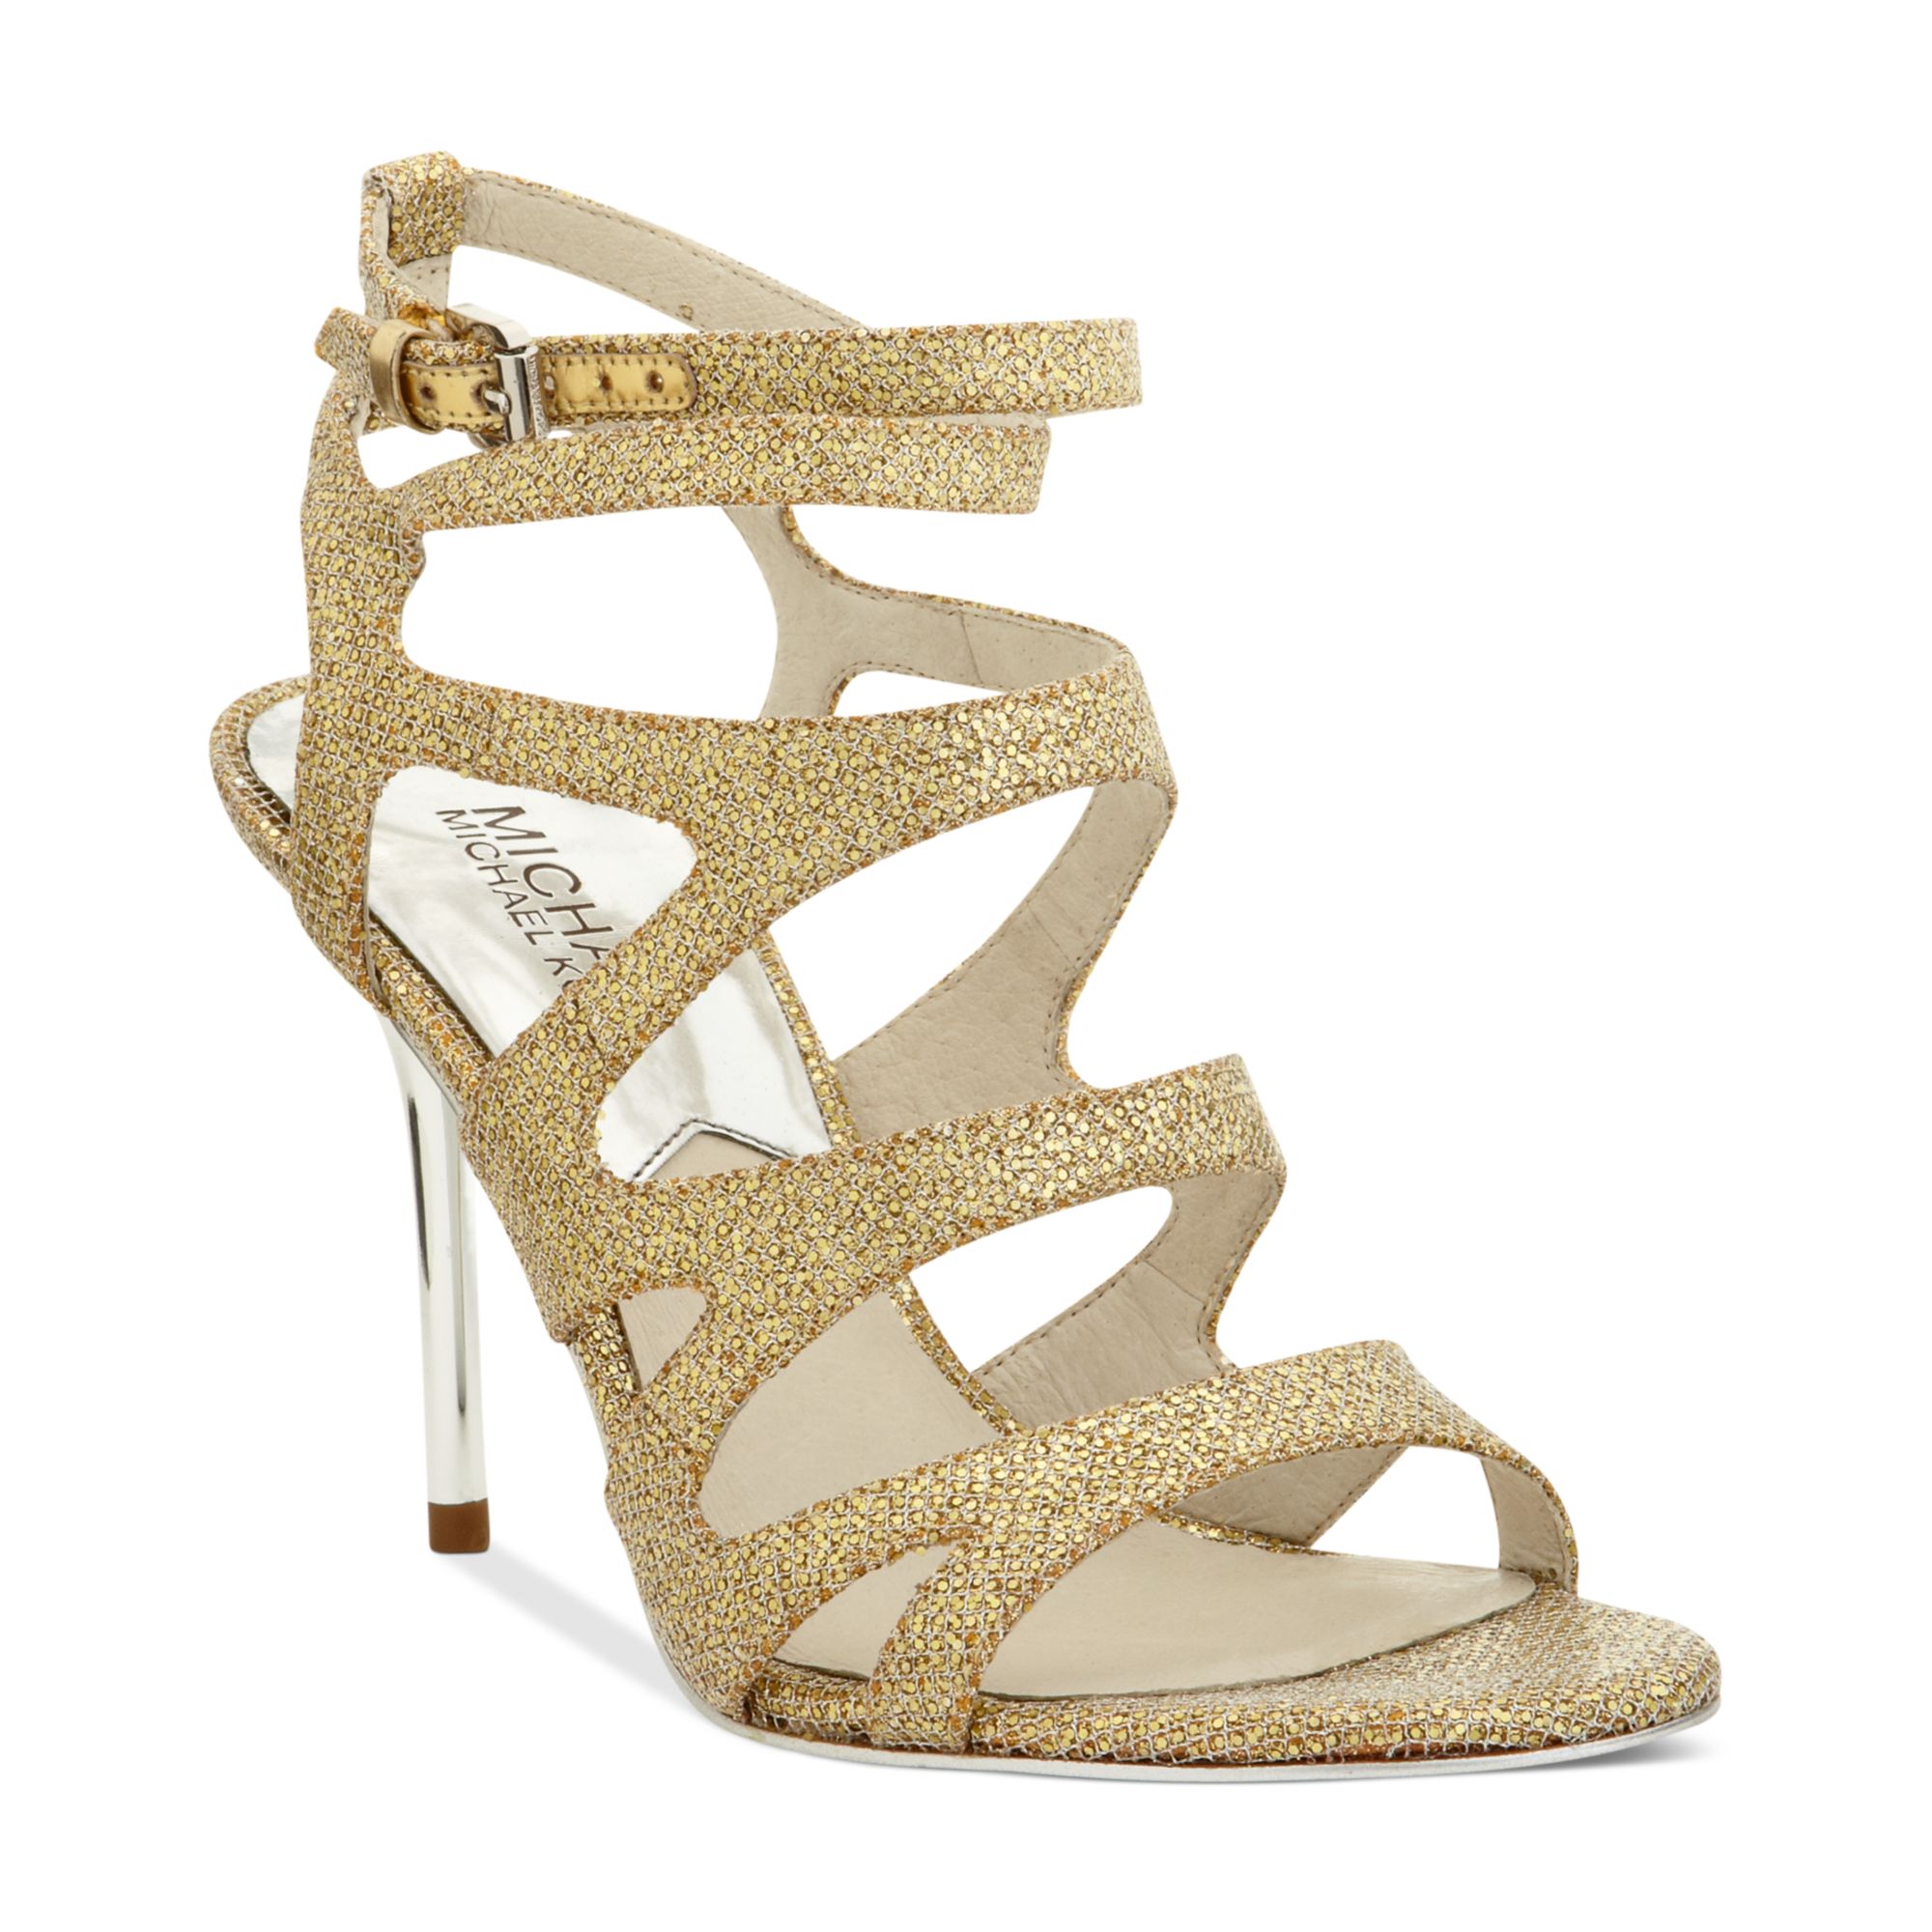 Michael Kors Yvonne Evening Sandals in Gold | Lyst